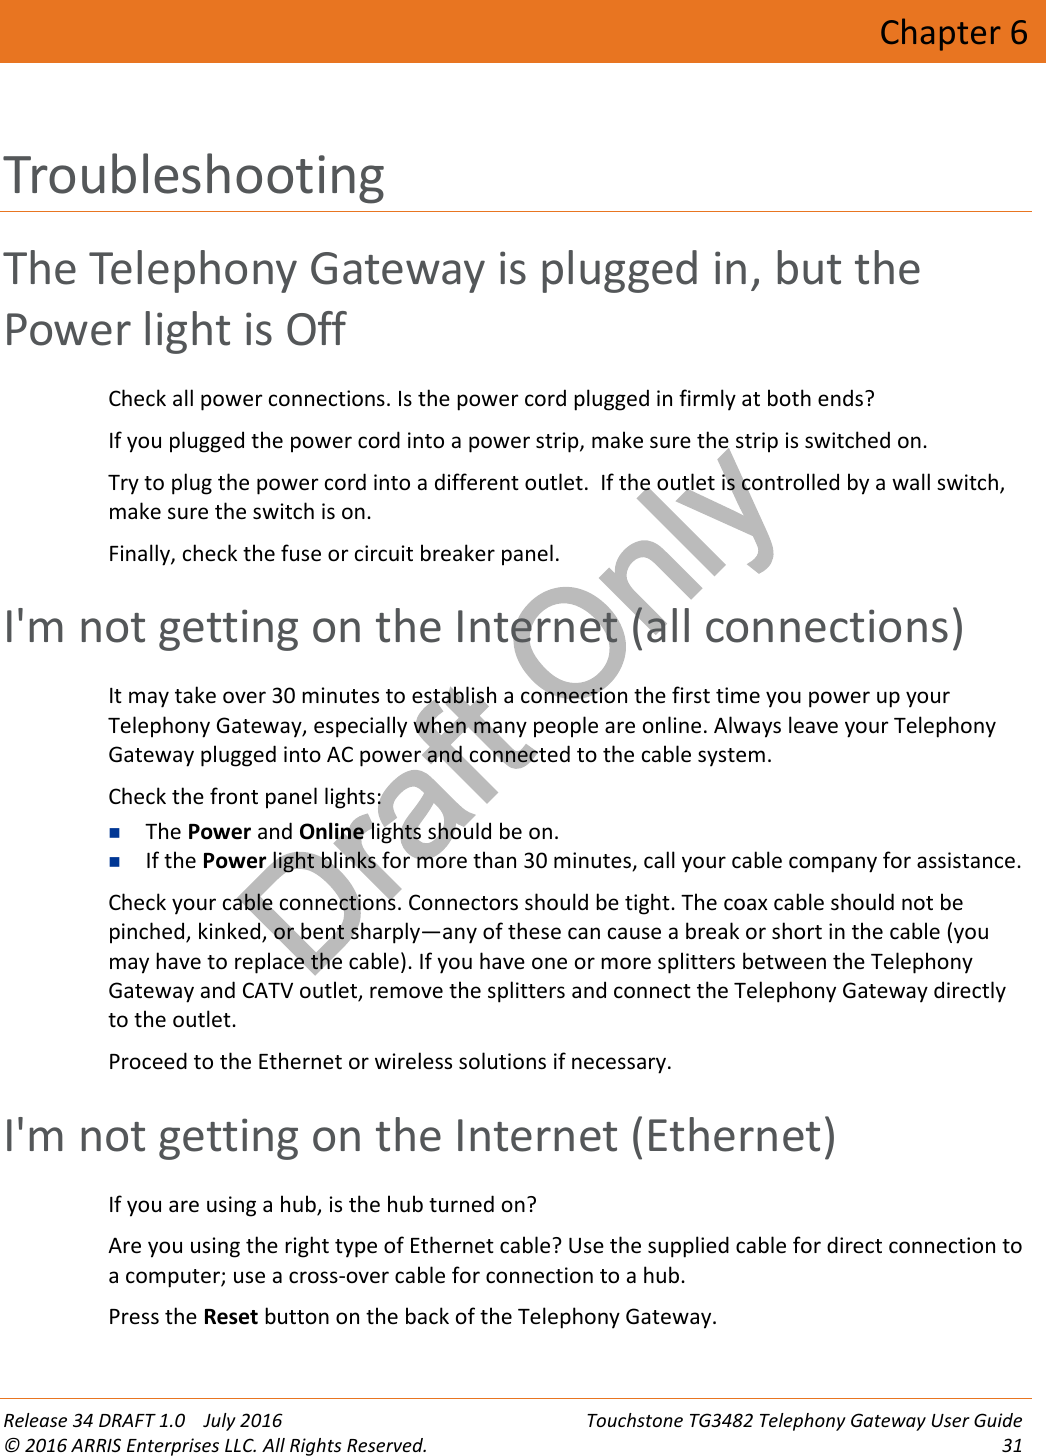 Draft OnlyRelease 34 DRAFT 1.0 July 2016 Touchstone TG3482 Telephony Gateway User Guide© 2016 ARRIS Enterprises LLC. All Rights Reserved. 31Chapter 6TroubleshootingThe Telephony Gateway is plugged in, but thePower light is OffCheck all power connections. Is the power cord plugged in firmly at both ends?If you plugged the power cord into a power strip, make sure the strip is switched on.Try to plug the power cord into a different outlet. If the outlet is controlled by a wall switch,make sure the switch is on.Finally, check the fuse or circuit breaker panel.I&apos;m not getting on the Internet (all connections)It may take over 30 minutes to establish a connection the first time you power up yourTelephony Gateway, especially when many people are online. Always leave your TelephonyGateway plugged into AC power and connected to the cable system.Check the front panel lights:The Power and Online lights should be on.If the Power light blinks for more than 30 minutes, call your cable company for assistance.Check your cable connections. Connectors should be tight. The coax cable should not bepinched, kinked, or bent sharply—any of these can cause a break or short in the cable (youmay have to replace the cable). If you have one or more splitters between the TelephonyGateway and CATV outlet, remove the splitters and connect the Telephony Gateway directlyto the outlet.Proceed to the Ethernet or wireless solutions if necessary.I&apos;m not getting on the Internet (Ethernet)If you are using a hub, is the hub turned on?Are you using the right type of Ethernet cable? Use the supplied cable for direct connection toa computer; use a cross-over cable for connection to a hub.Press the Reset button on the back of the Telephony Gateway.